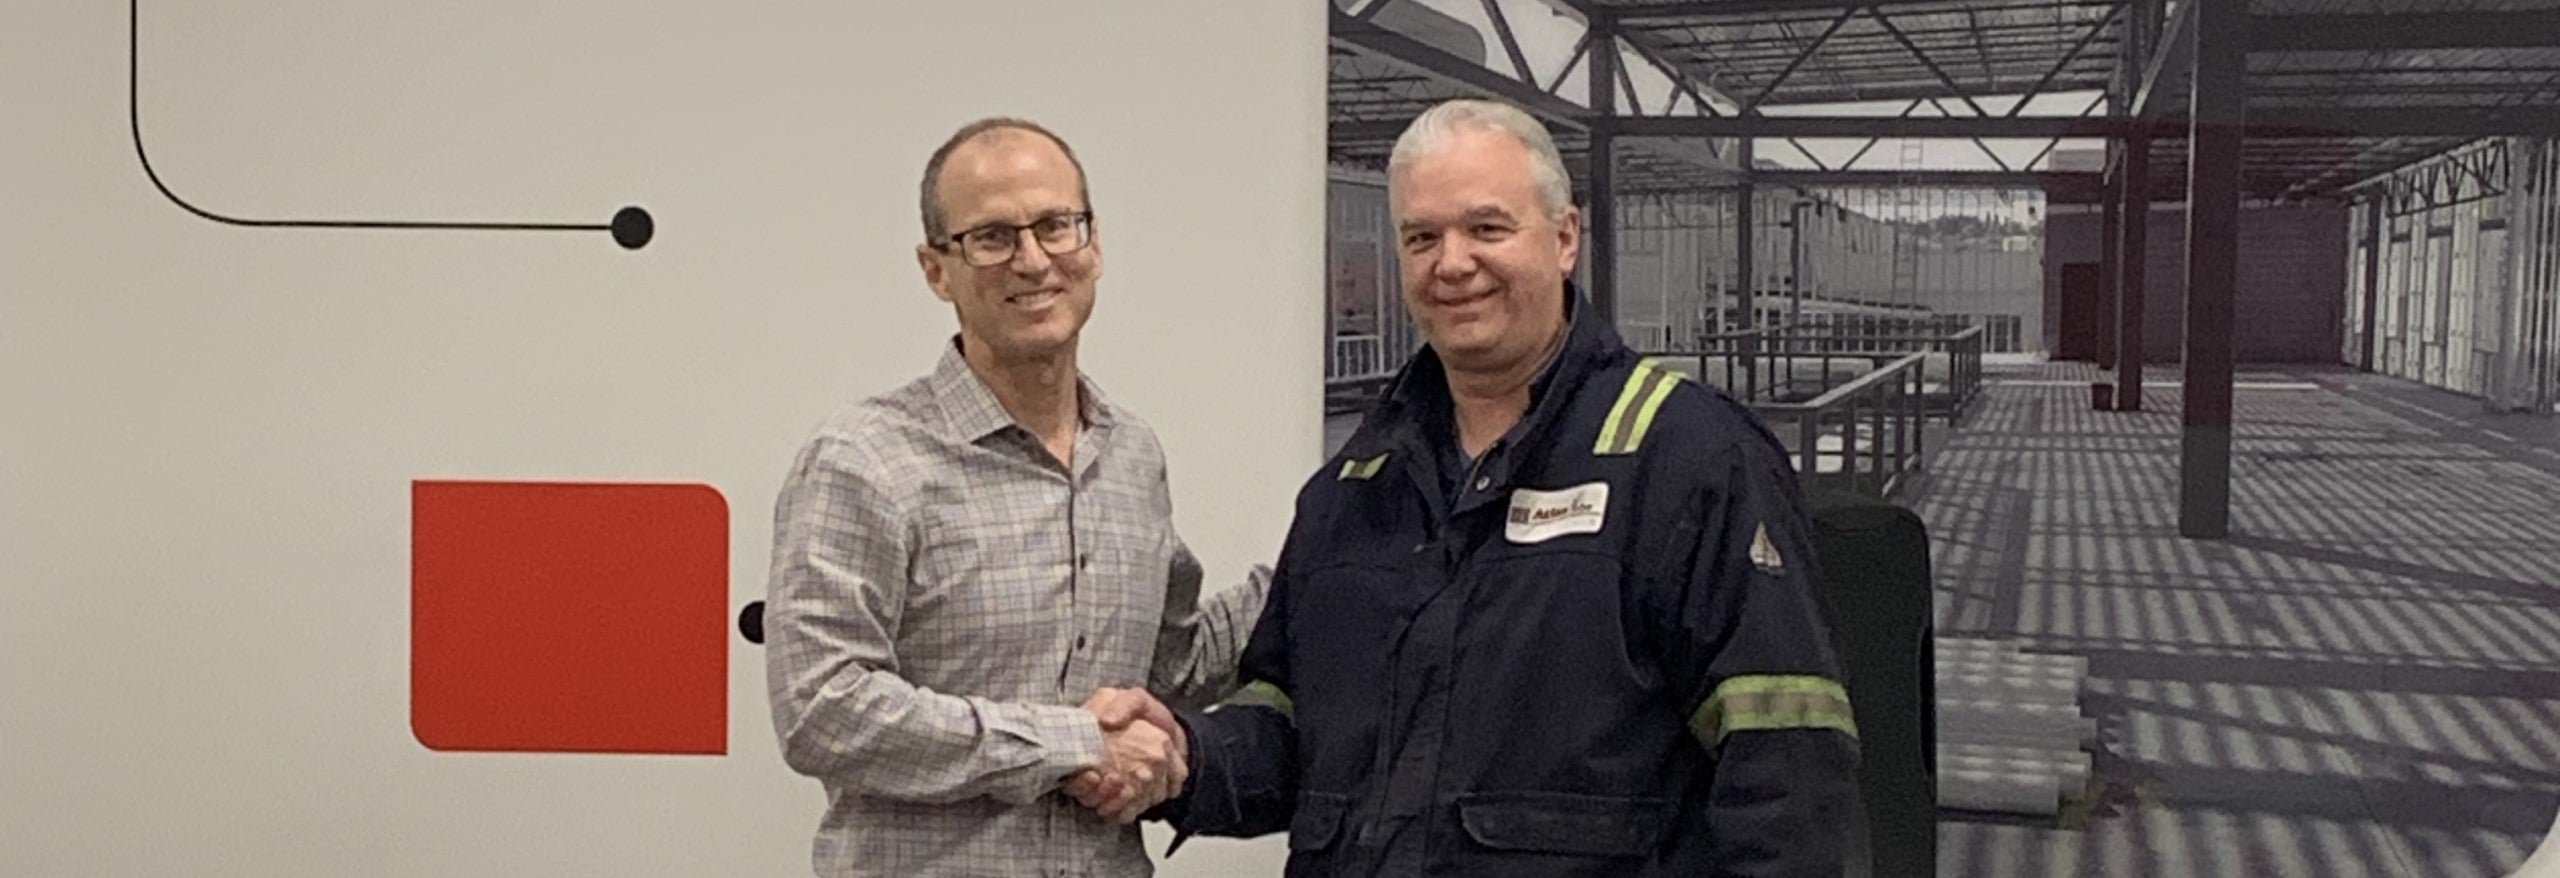 Zekelman Industries Honors Teammates with New Loyalty Awards